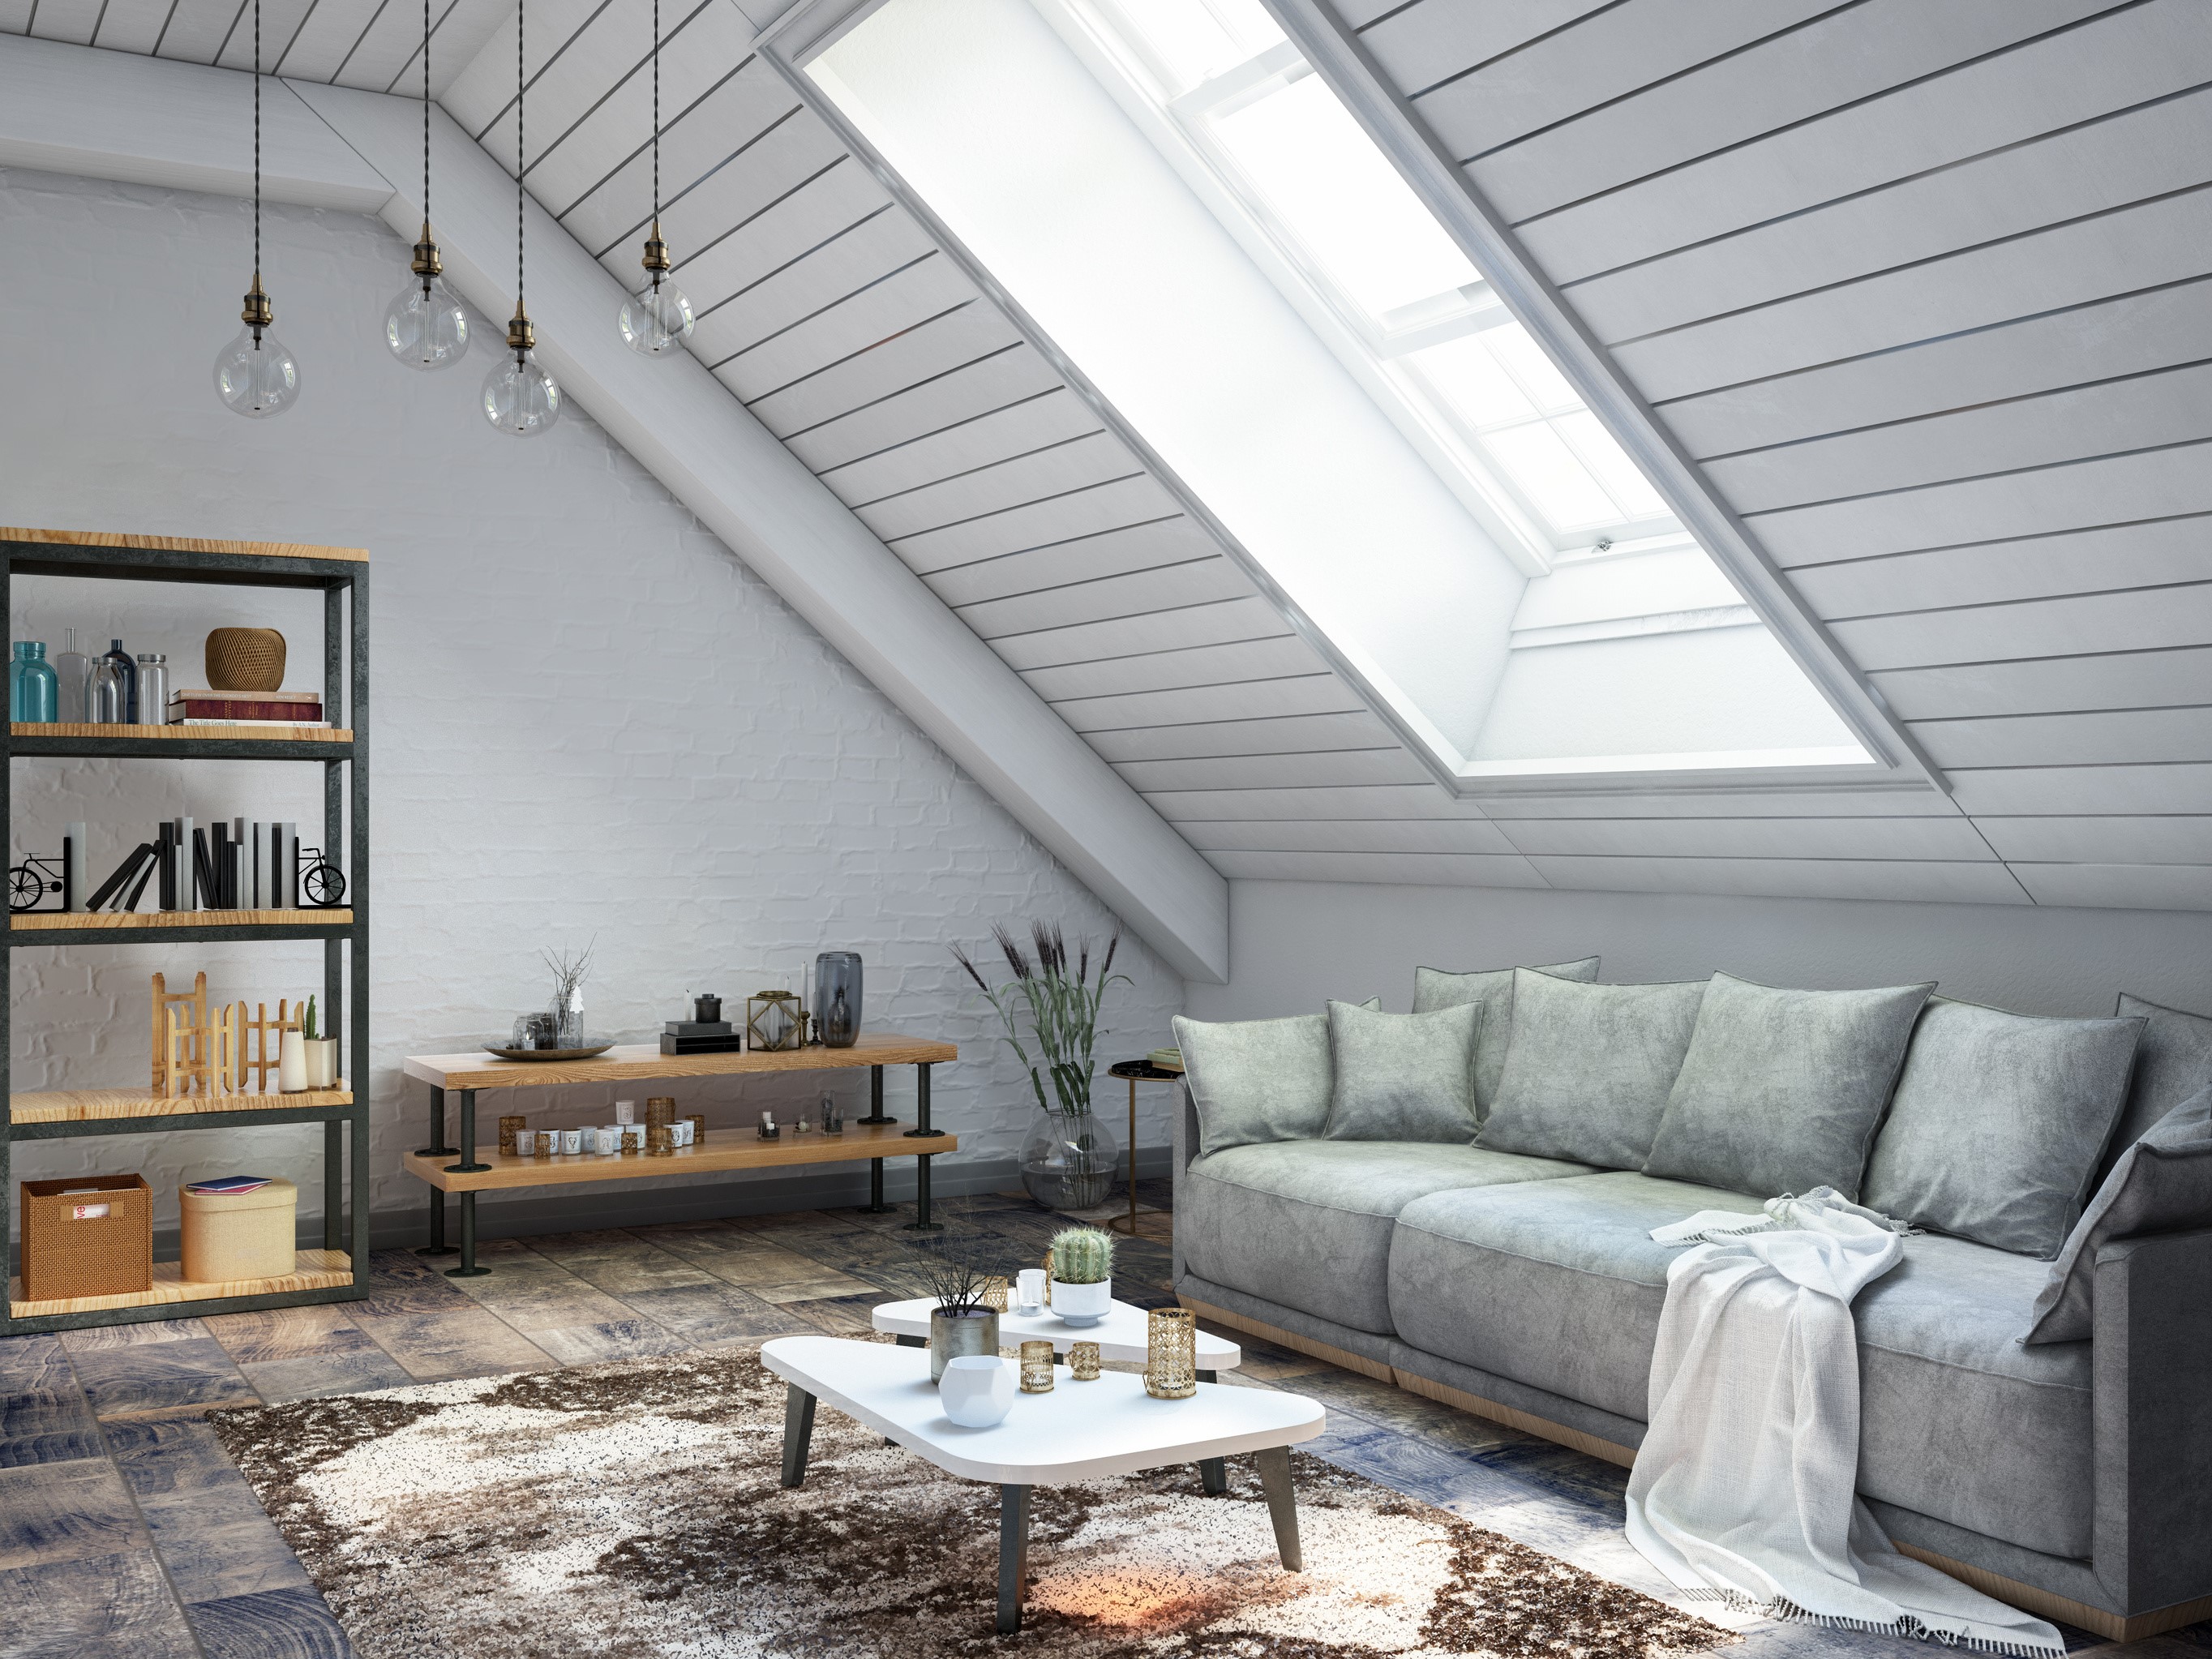 Ideas on what to do with a loft space in your home